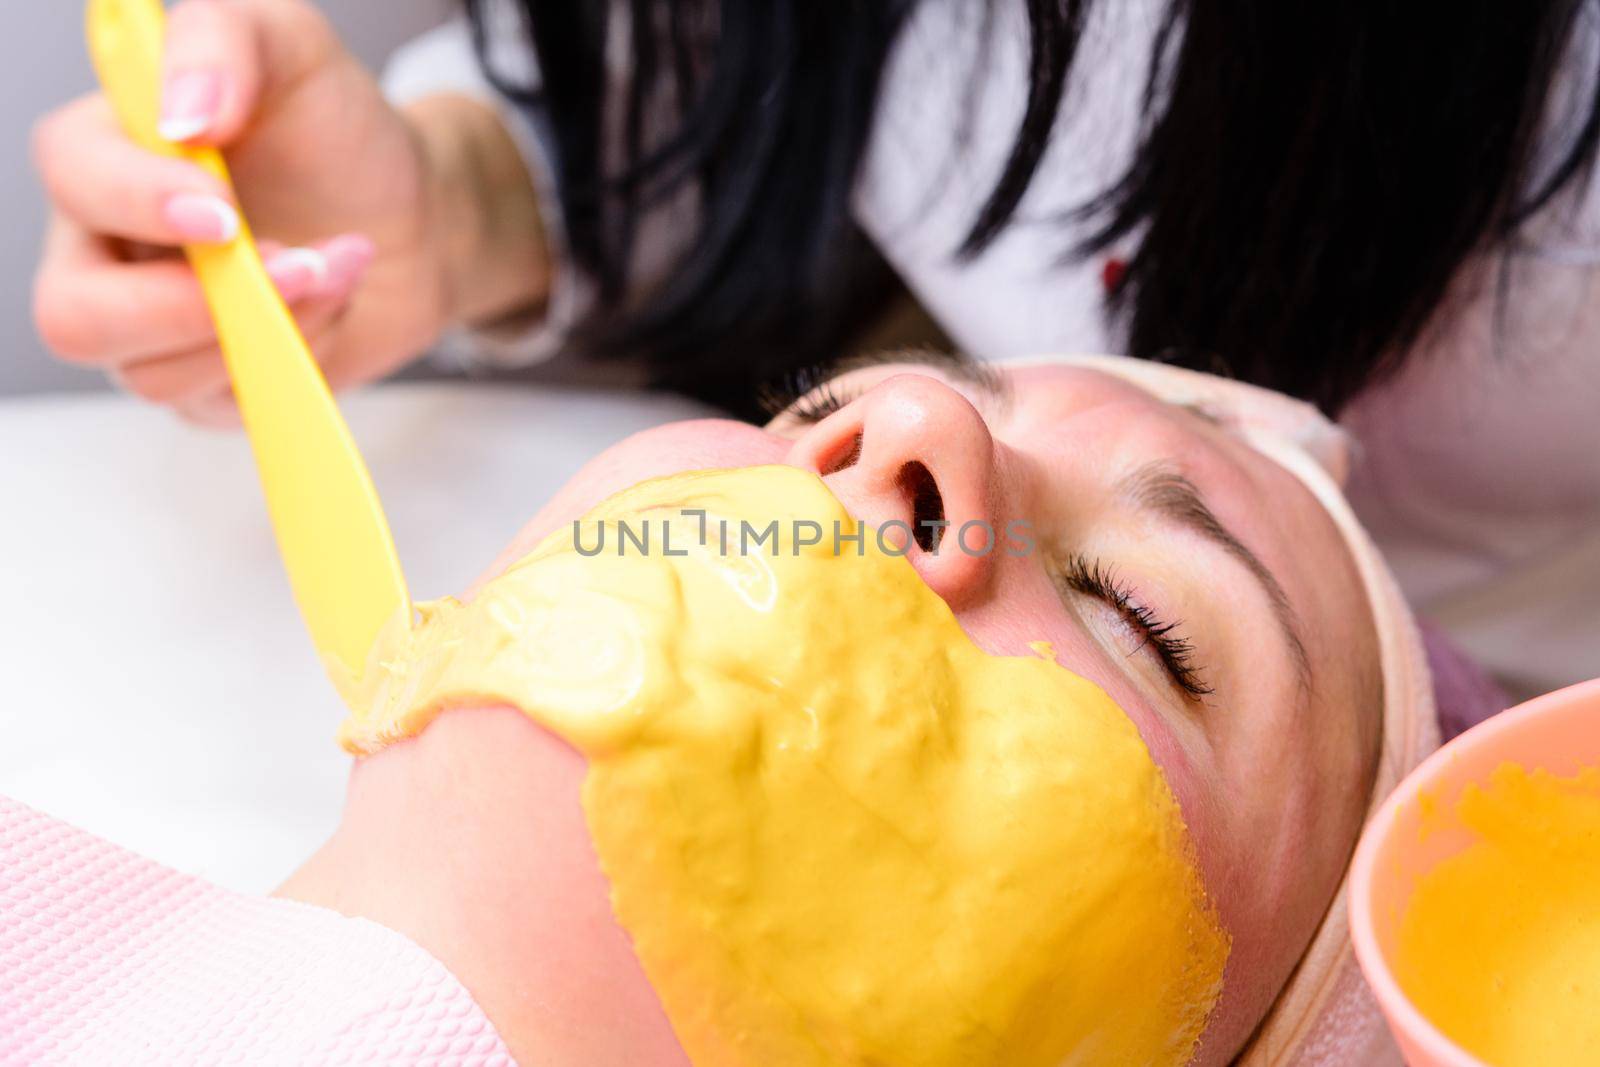 Applying a golden mask on the face after the cleansing procedure, an aromatic mask to moisturize, rejuvenate and lighten the skin. by Niko_Cingaryuk